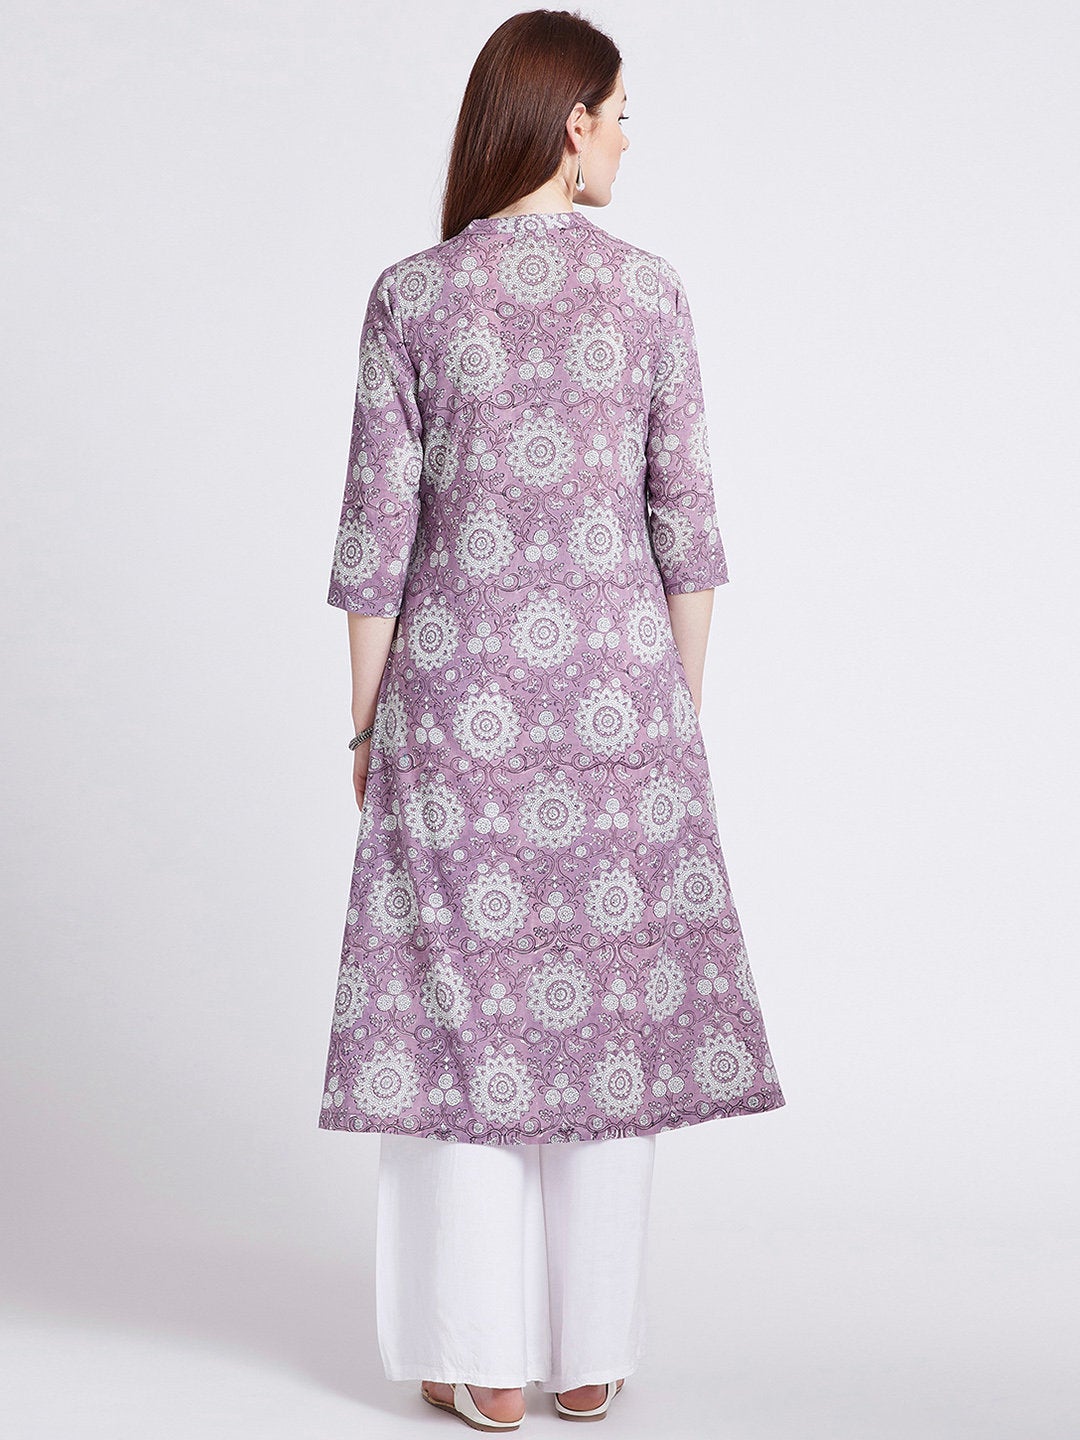 Hand block printed long kurta with front slit in purple colour with pockets with button detailing on front